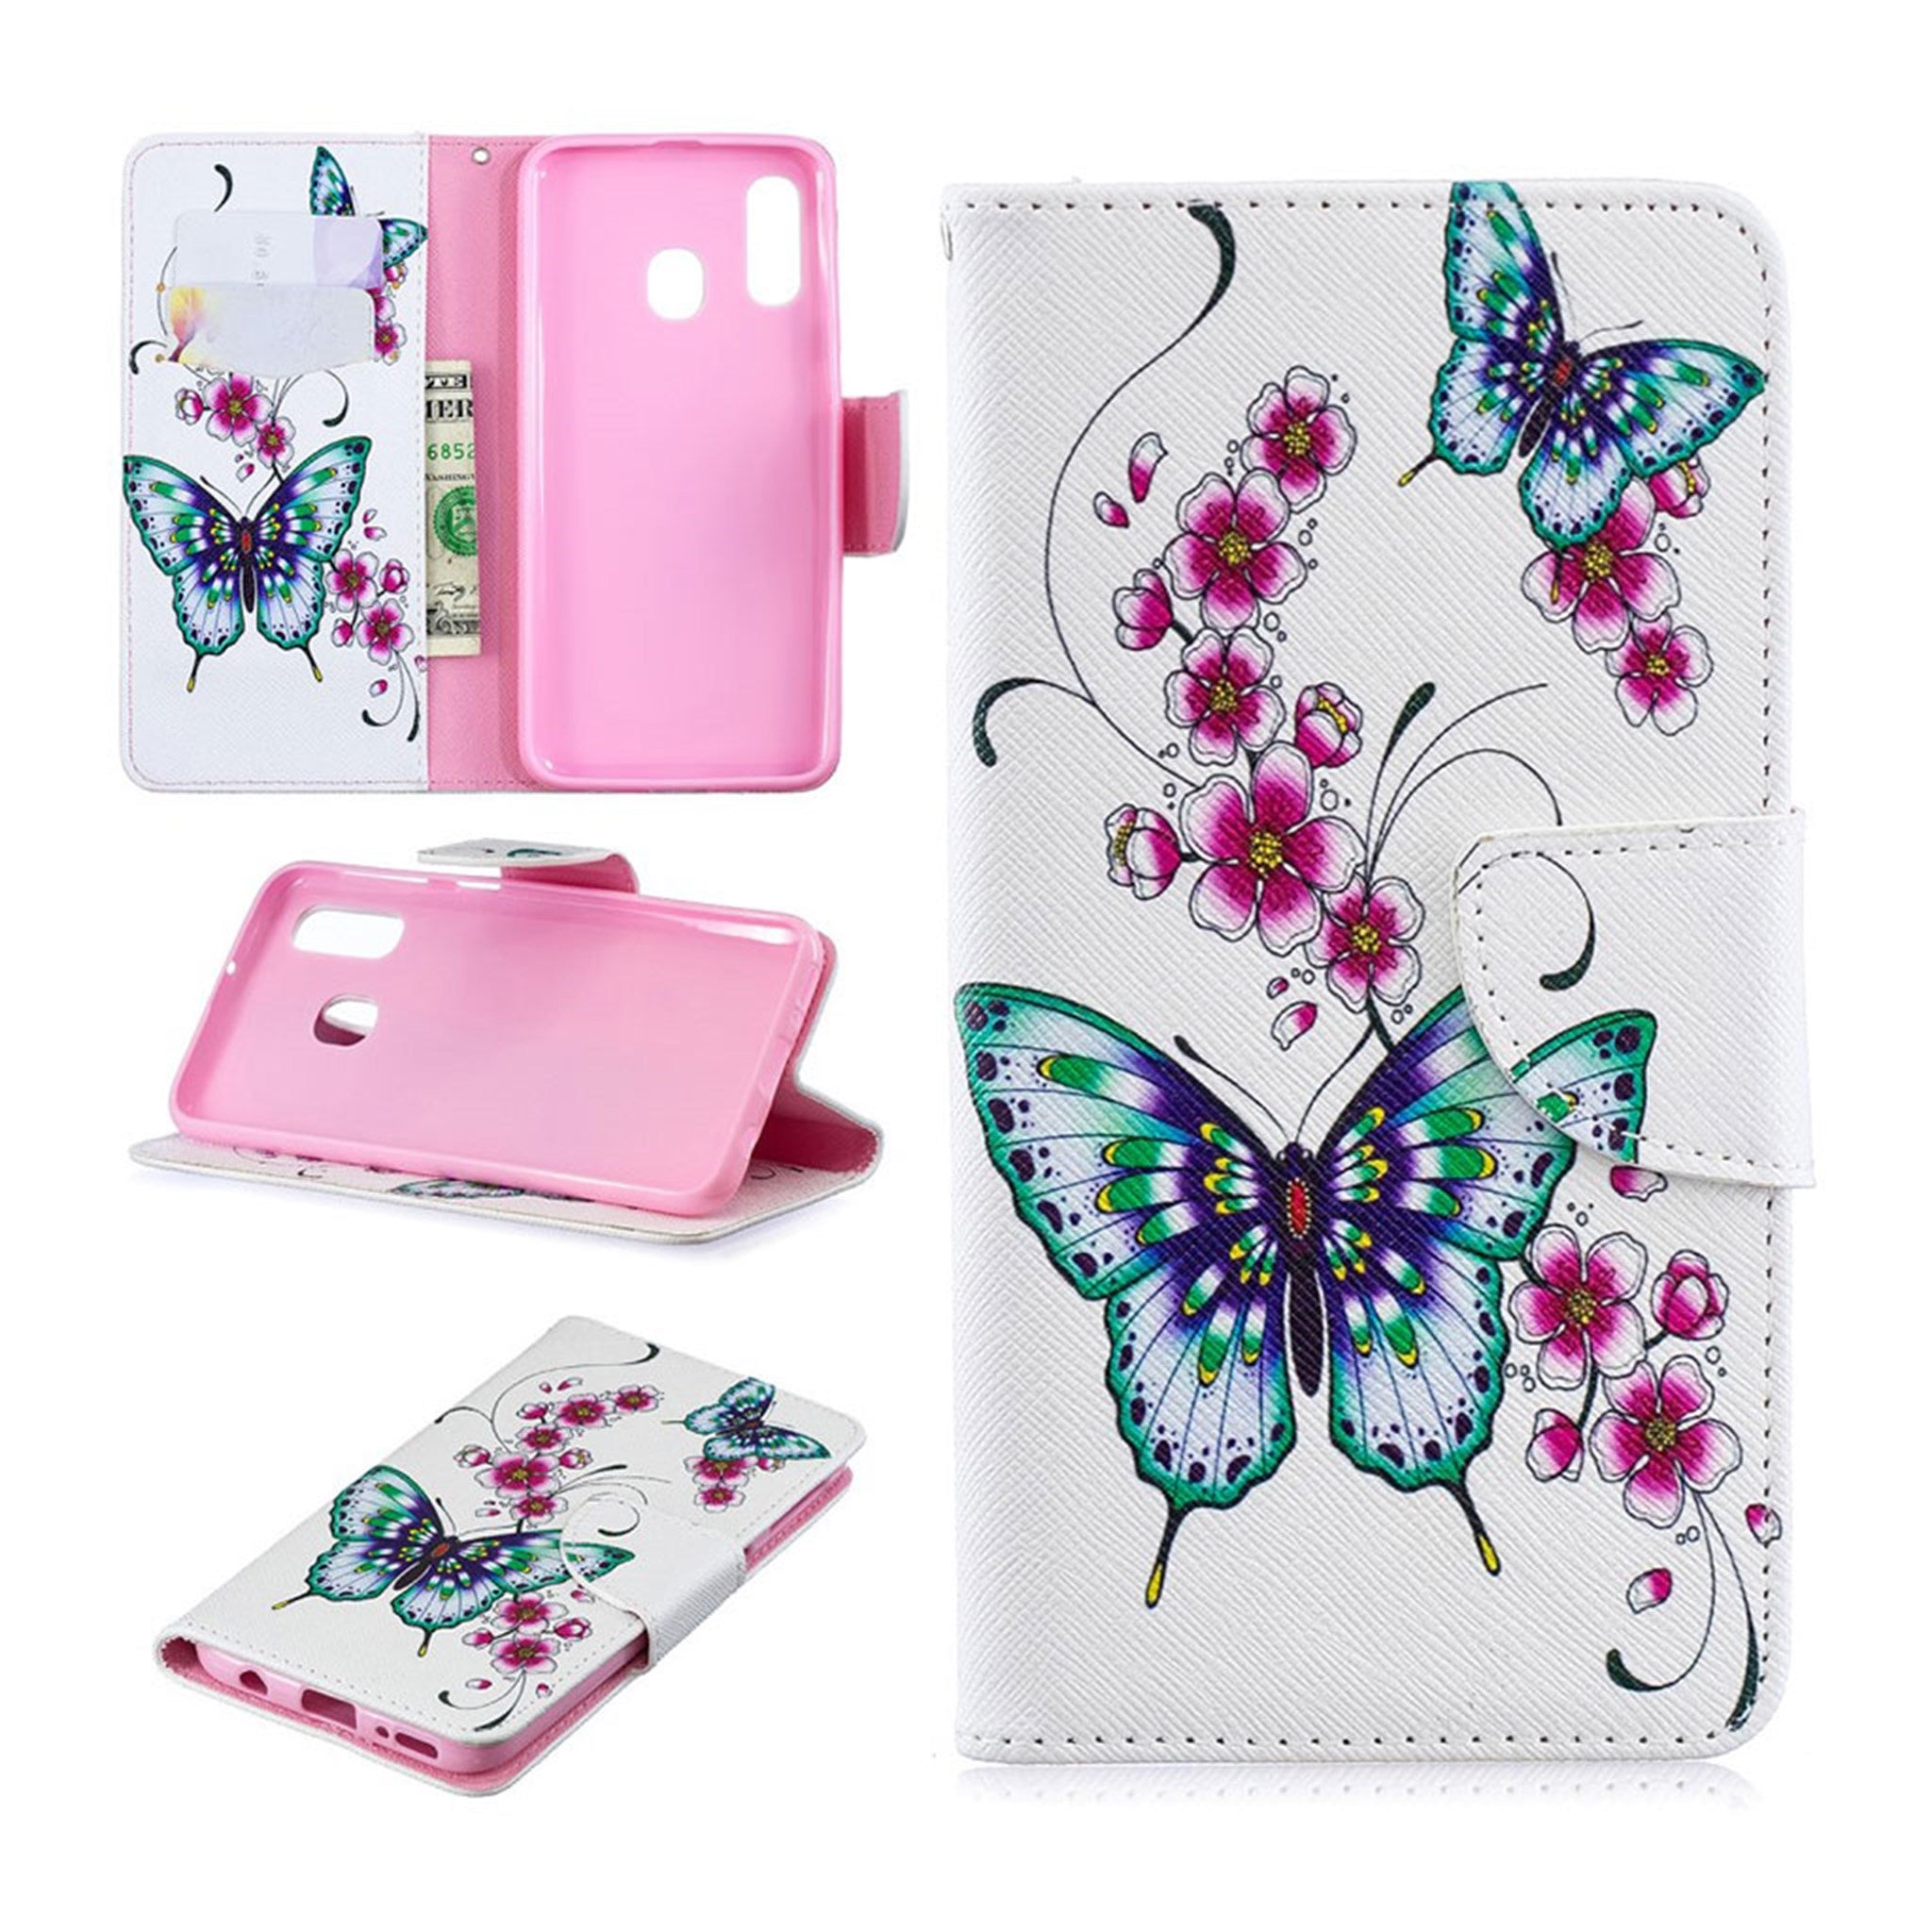 Samsung Galaxy A40 pattern leather case - Butterflies and Flowers